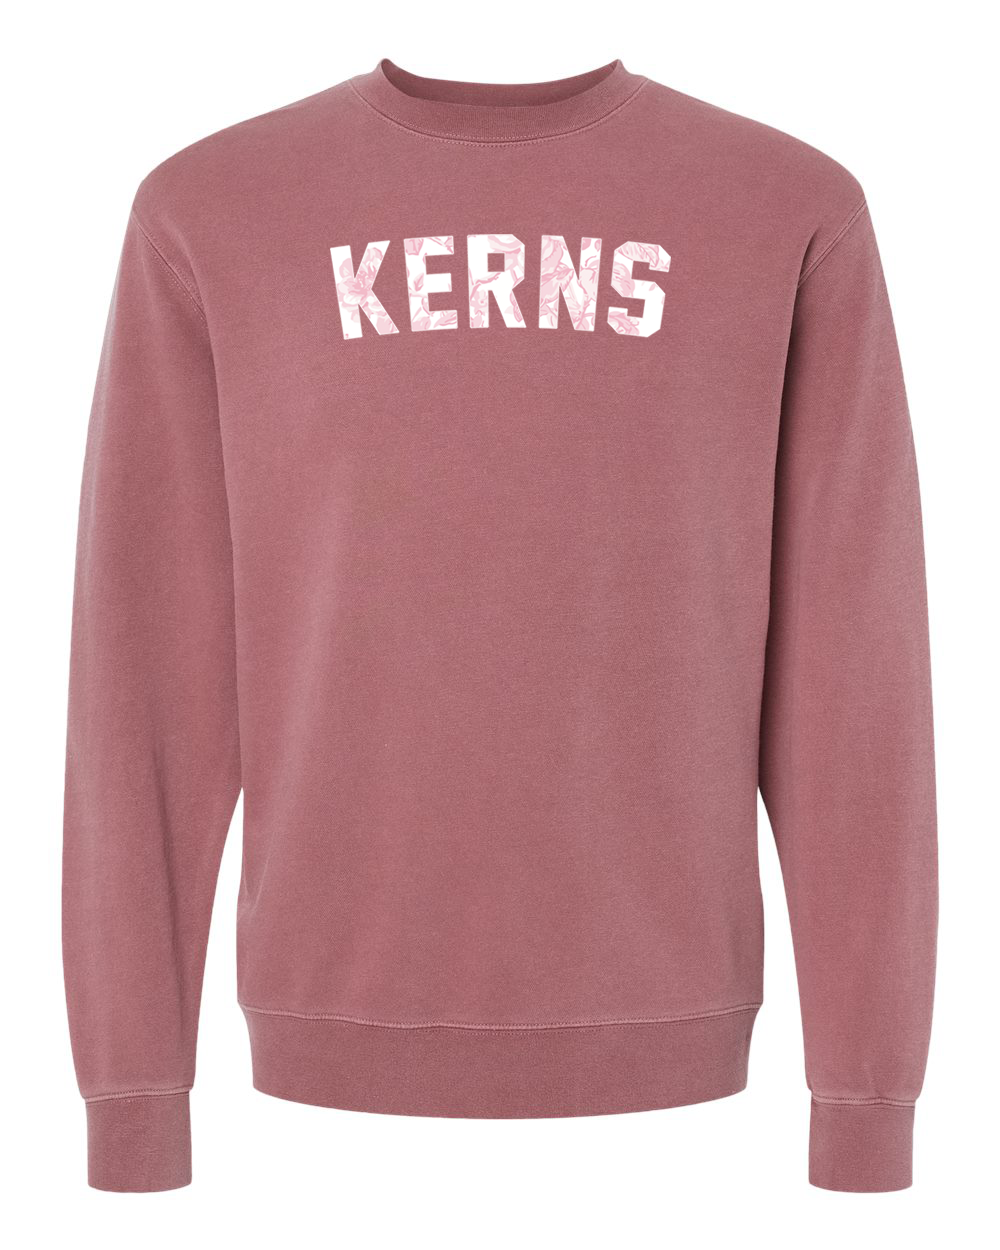 Kerns Floral Pigment Dyed Crew